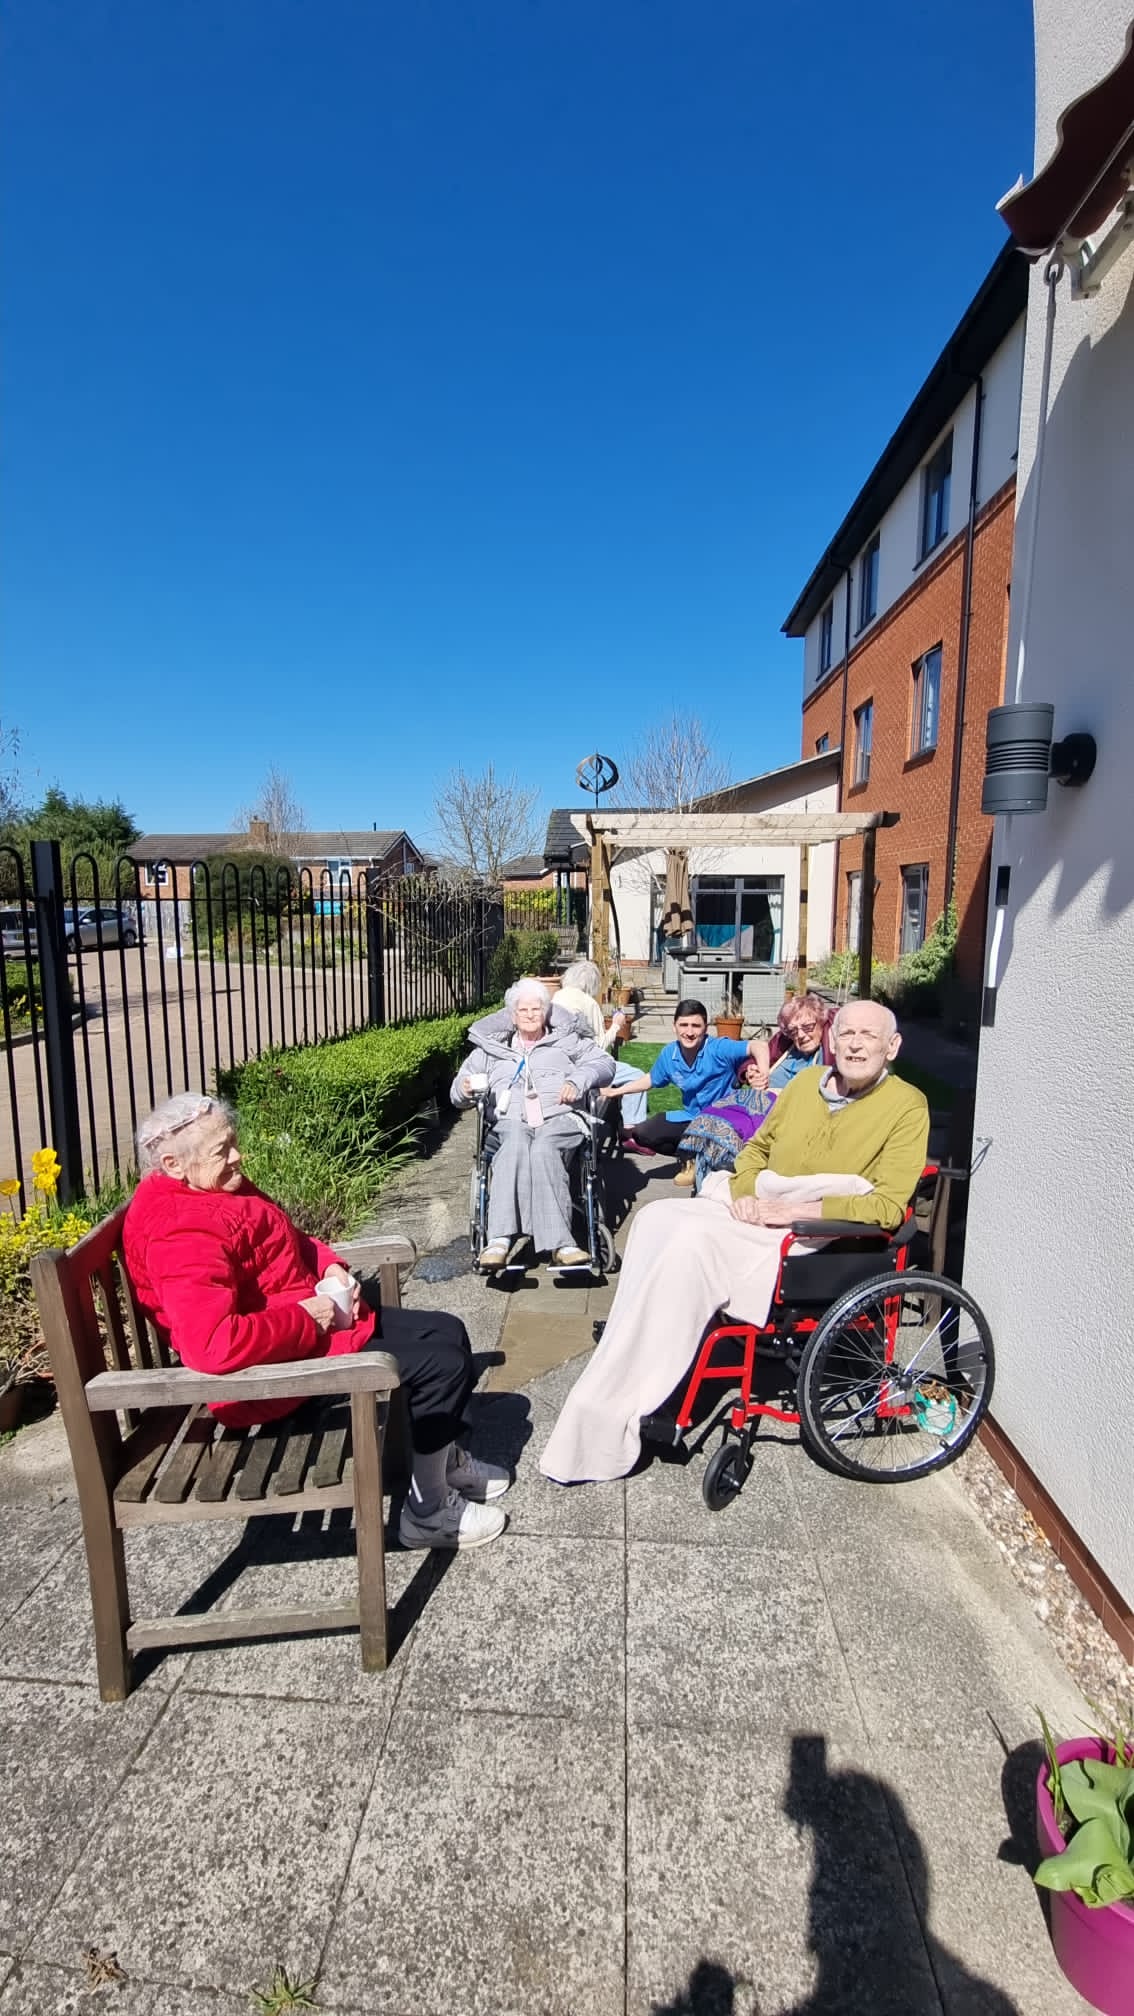 The Ashton Care Home residents in the garden enjoying the sun and clear skies.